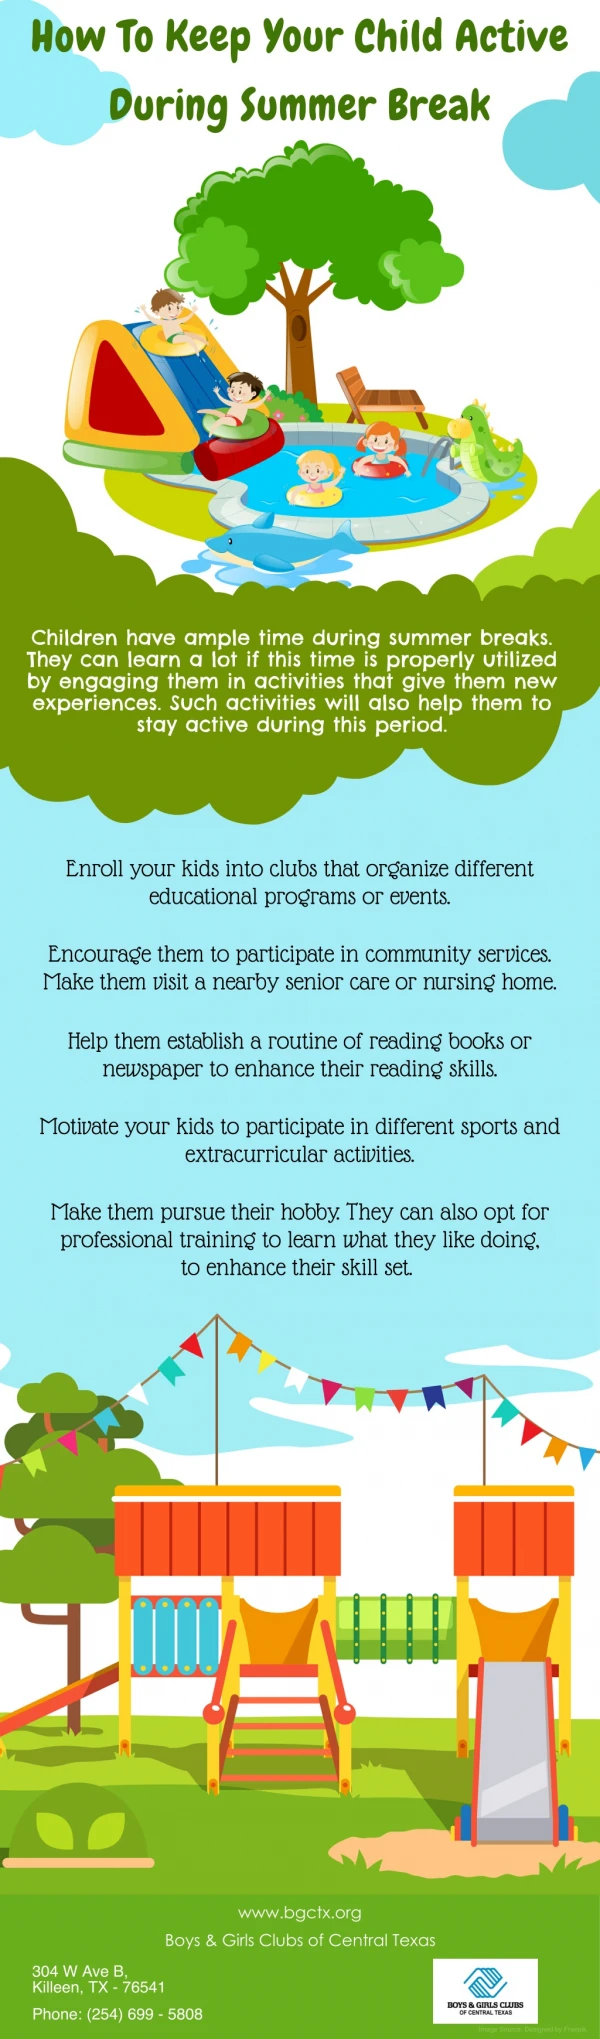 How To Keep Your Child Active During Summer Break